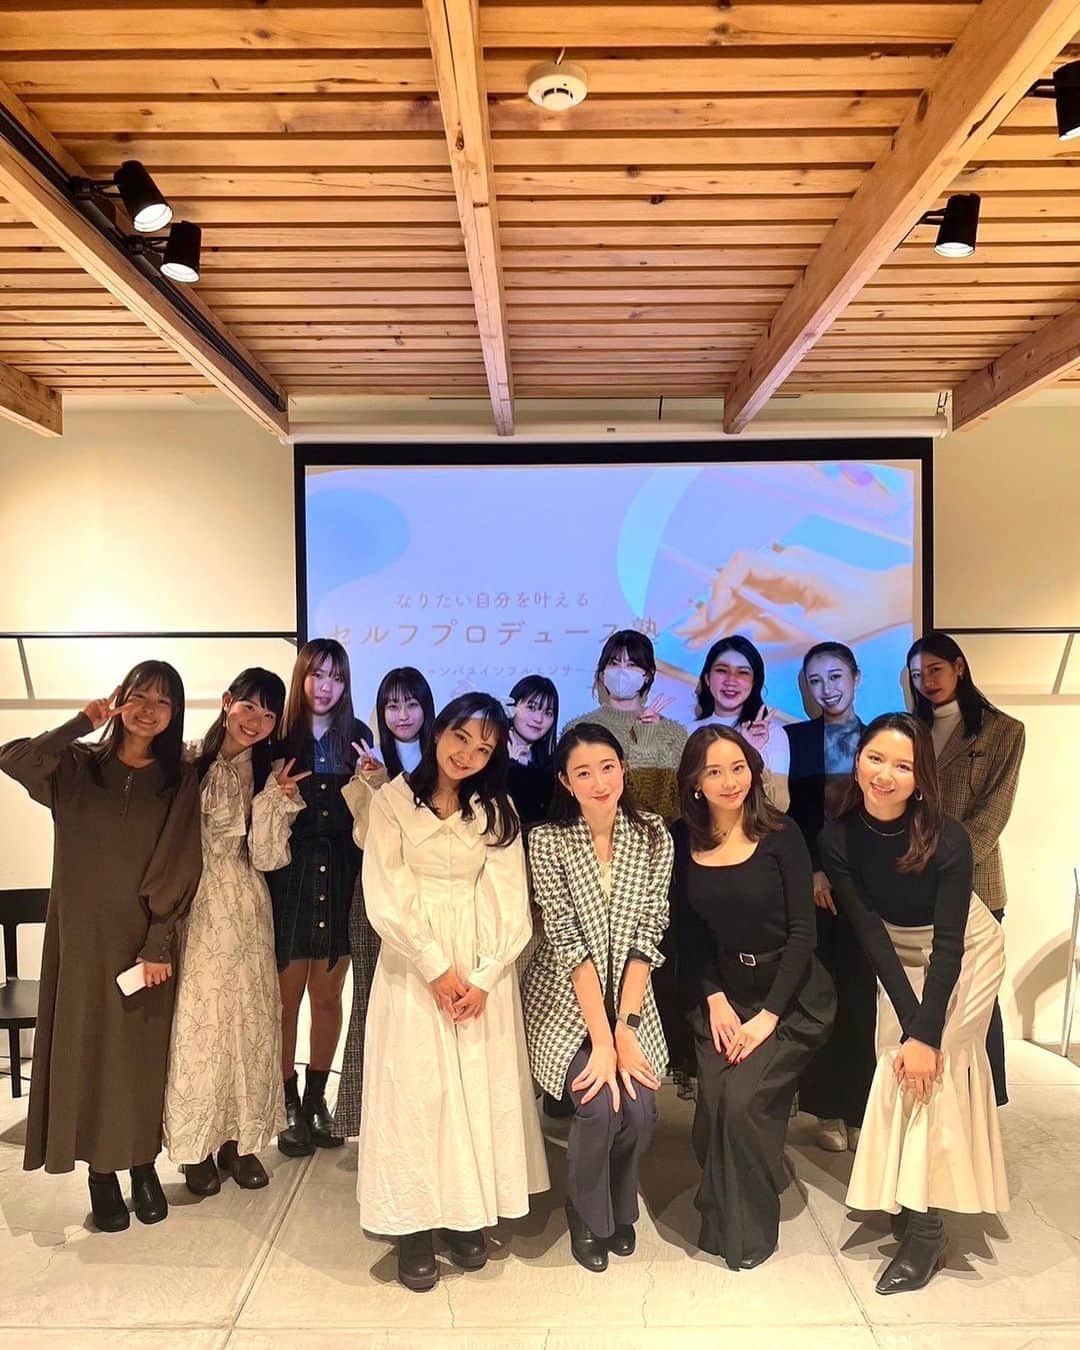 渋谷栞南さんのインスタグラム写真 - (渋谷栞南Instagram)「【Campus Influencer Event】 20/11/2023@Shibuya @_anello1234   I gave a talk to a group of college girls about how I manage my social media accounts, especially after I joined the beauty contest of my uni.   Thank you for having me as a speaker😌 It was a valuable experience for me.  【Women's Leadership & Peace Forum】 21/11/2023@First Members’ Office Building of the House of Representatives @japanambassador   We discussed women’s leadership & peace. I would like to thank the Ukrainian women's delegation for coming to Japan to join this forum.  I got keenly aware that what is happening in Ukraine is real. I was also exposed to the strength, determination and beliefs of Ukrainian women.   _________________________________  【キャンパスインフルエンサーイベント】 2023/11/20@渋谷  女子大生の皆さんに大学ミスコン参加後、SNSをどのように動かしてきたかお話させていただきました。  ゲストとしてお話させていただき大変ありがとうございました😌貴重な経験でした。  【女性のリーダーシップと平和のフォーラム】 2023/11/21@衆議院第一議員会館  女性のリーダーシップと平和について話し合いました。会議に参加するために来日してくださったウクライナ代表団に感謝いたします。  ウクライナで起きていることを現実のものとして改めて痛感しました。ウクライナ女性の芯の強さと信念を感じる講演、ディスカッションでした。  #japanesegirl #japanambassador #japaneseculture #japaneseuniversity #learningjapanese #jlpt #日本語勉強 #日本語能力試験 #ukraine #ukraine🇺🇦 #🇺🇦 #peaceforukraine #womensleadership #ミスコン #snsマーケティング #女子大生」12月5日 20時00分 - kannashibuya_japan